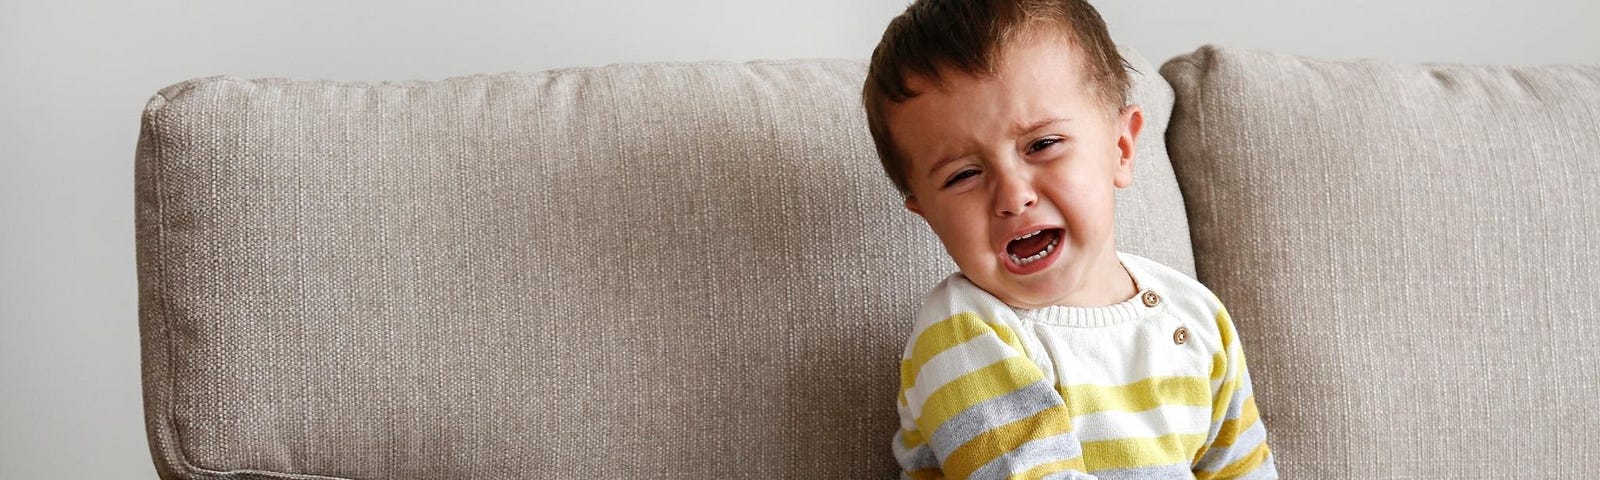 crying toddler sitting on couch